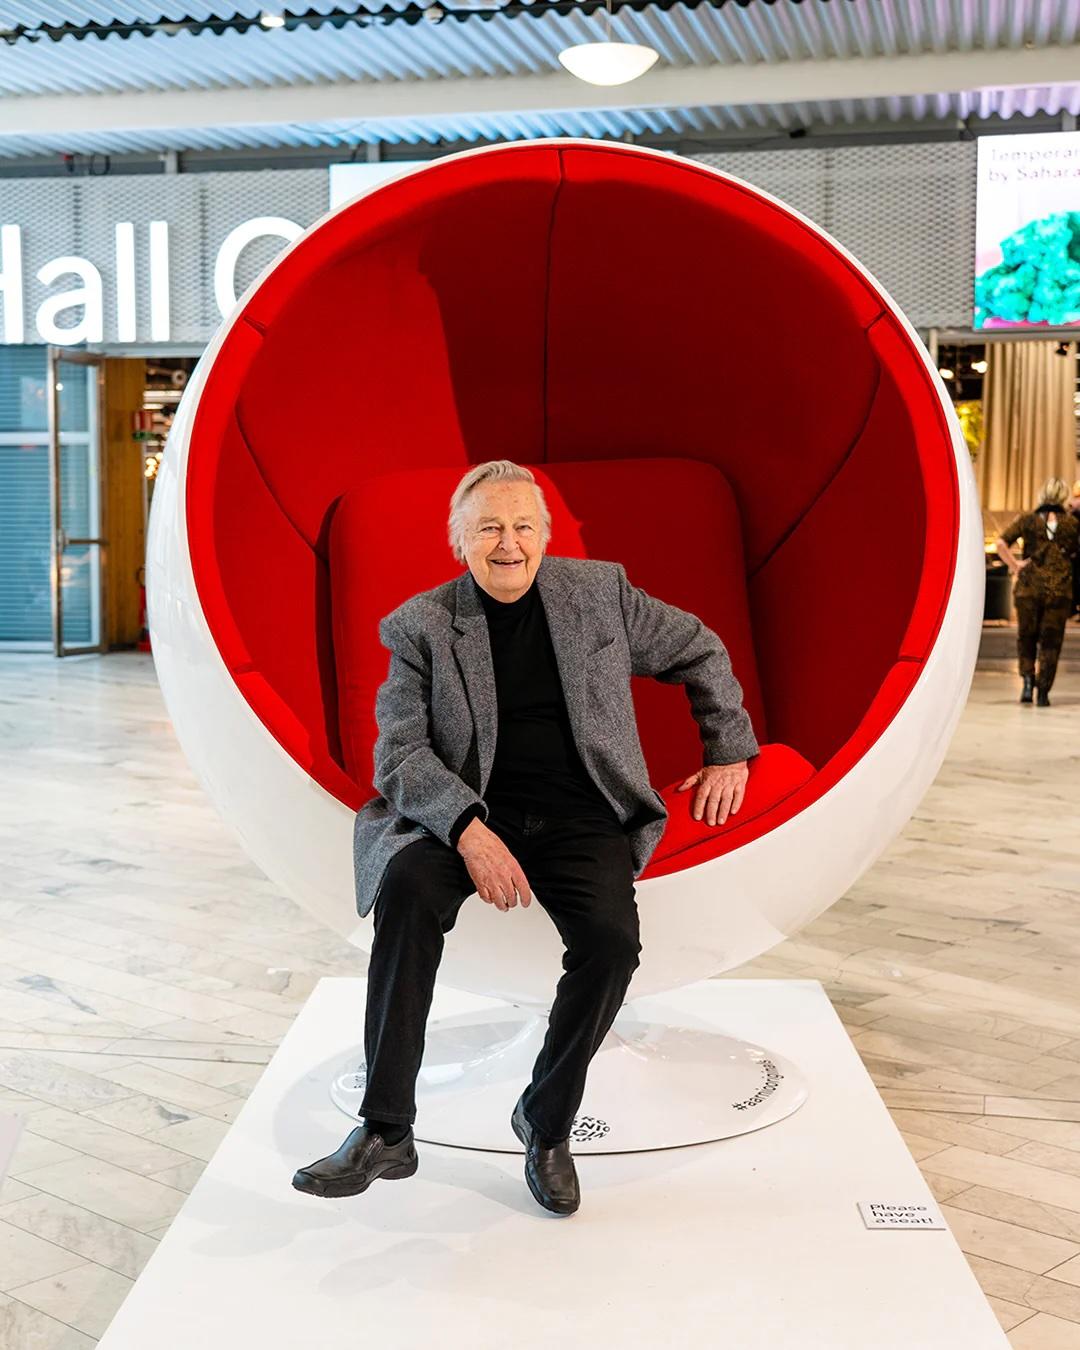 he Leather Ball Chair Designed by Eero Aarnio 1963 Designed by Eero Aarnio 1963 Designed by Eero Aarnio 1963 Designed by Eero Aarnio 1963 The Ball Chair was designed in the early 1960s, debuting at the Cologne Furniture Fair in 1966. The chair is